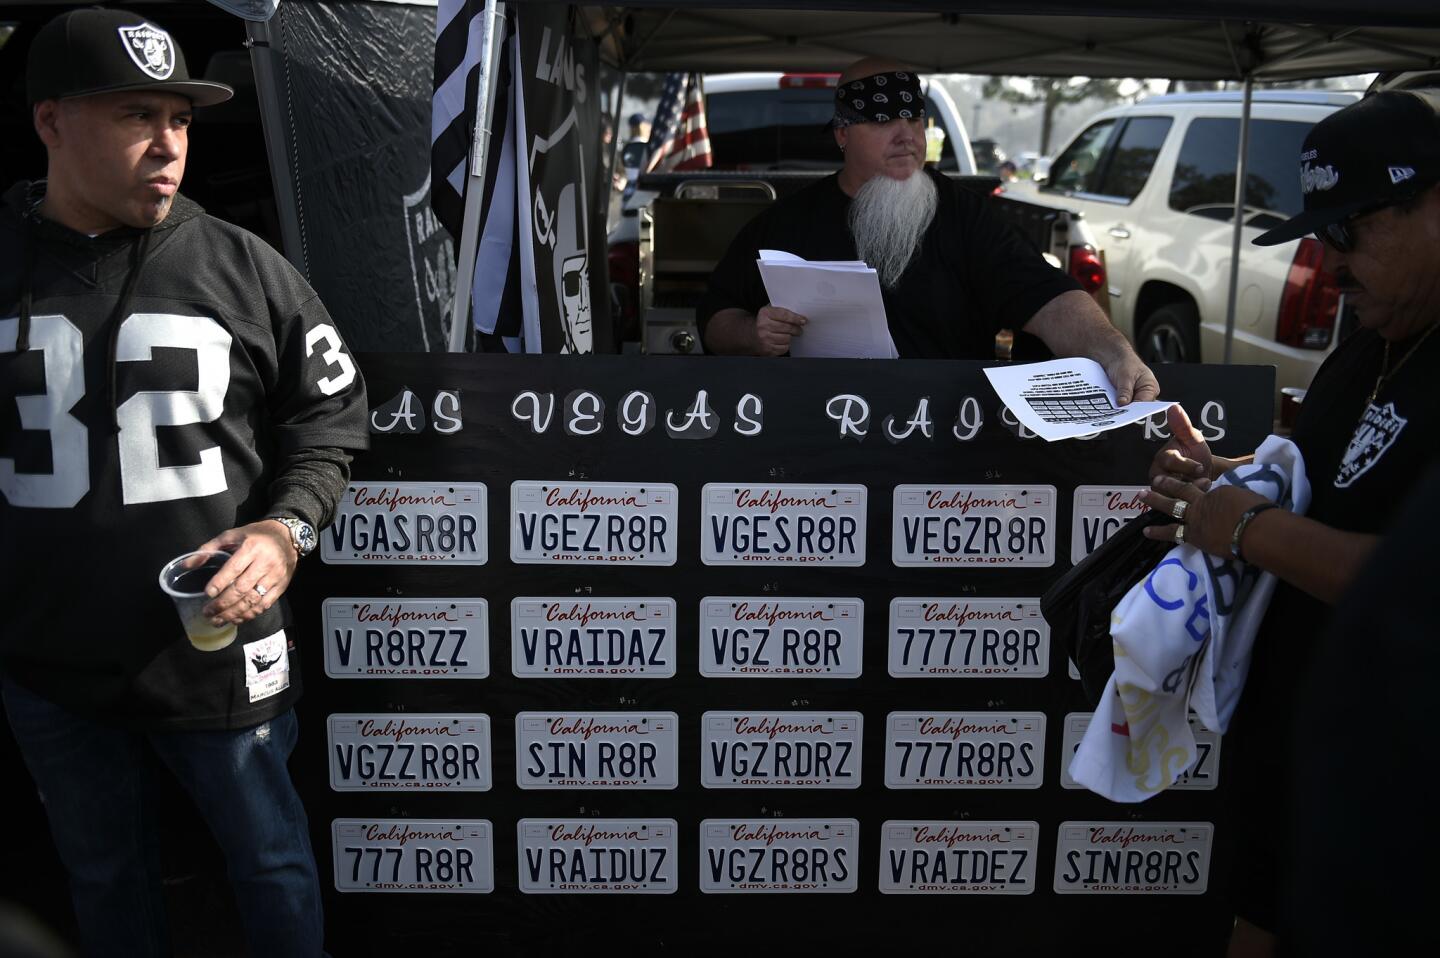 Oakland Raiders fans look on while tailgating before an NFL football game against the Los Angeles Chargers Sunday, Dec. 31, 2017, in Carson, Calif. (AP Photo/Kelvin Kuo)